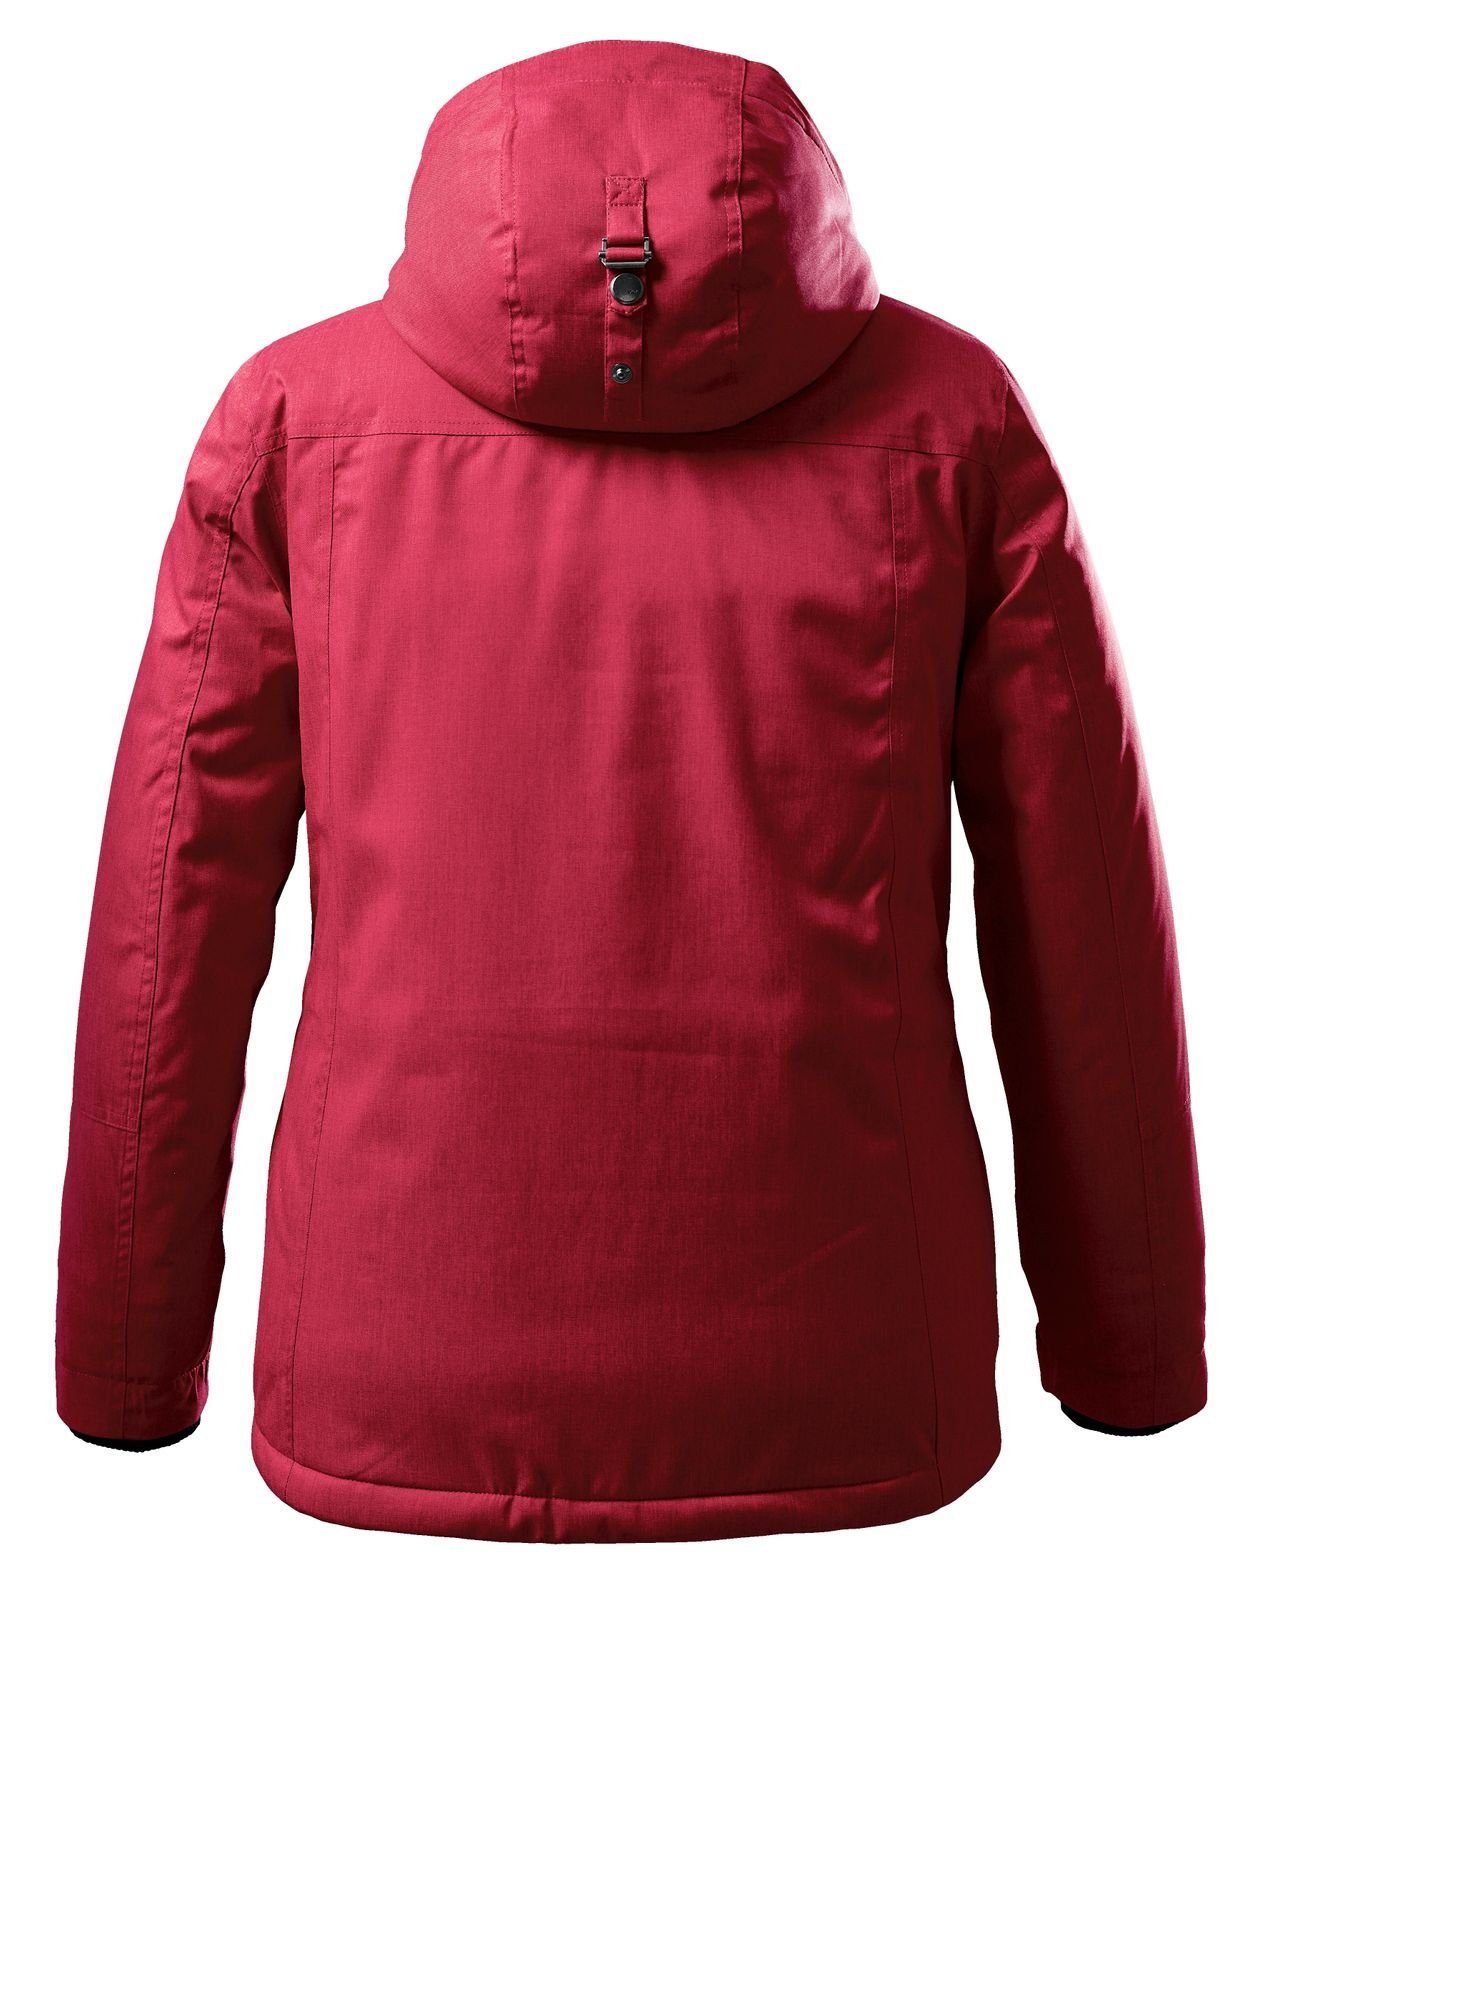 STOY Parka deep red (00405) 37340